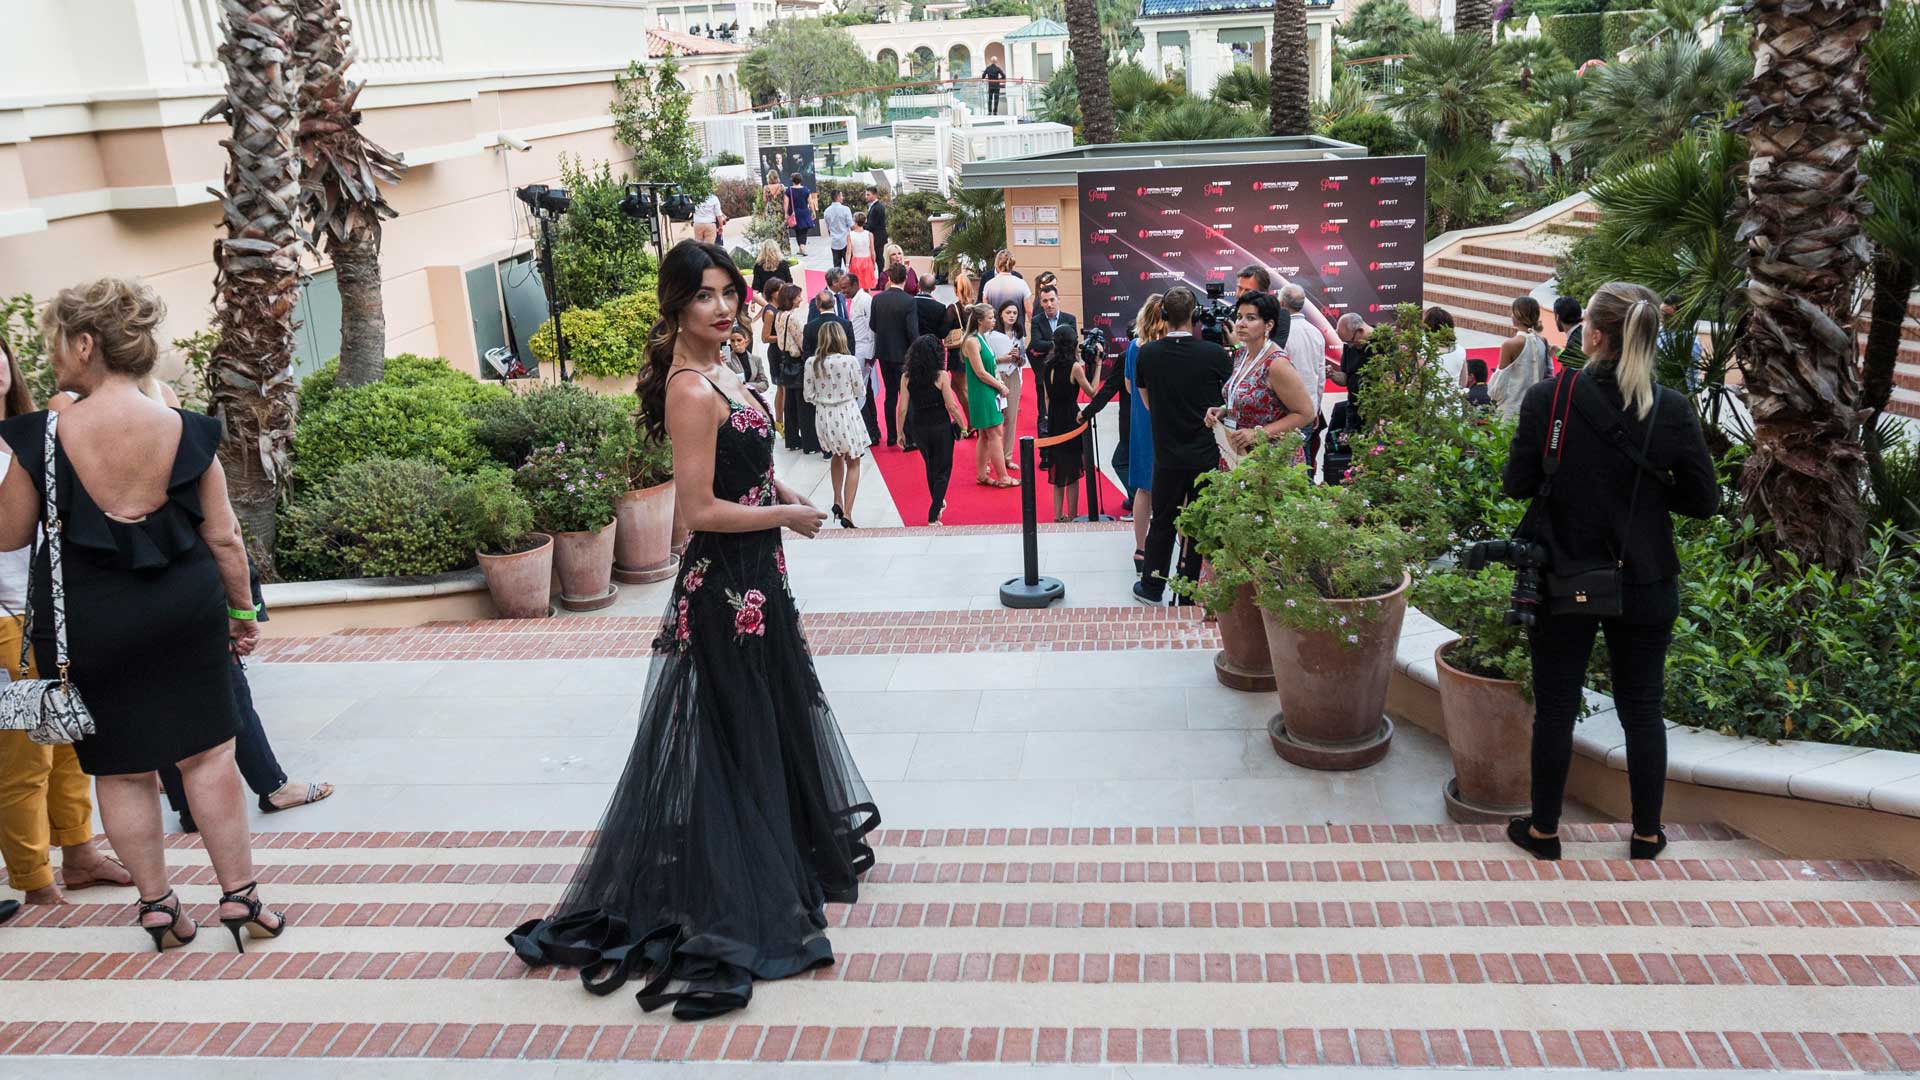 In a gorgeous black gown with floral appliques, Jacqueline MacInnes Wood makes her way into the Monte Carlo TV Festival's Pool Party.